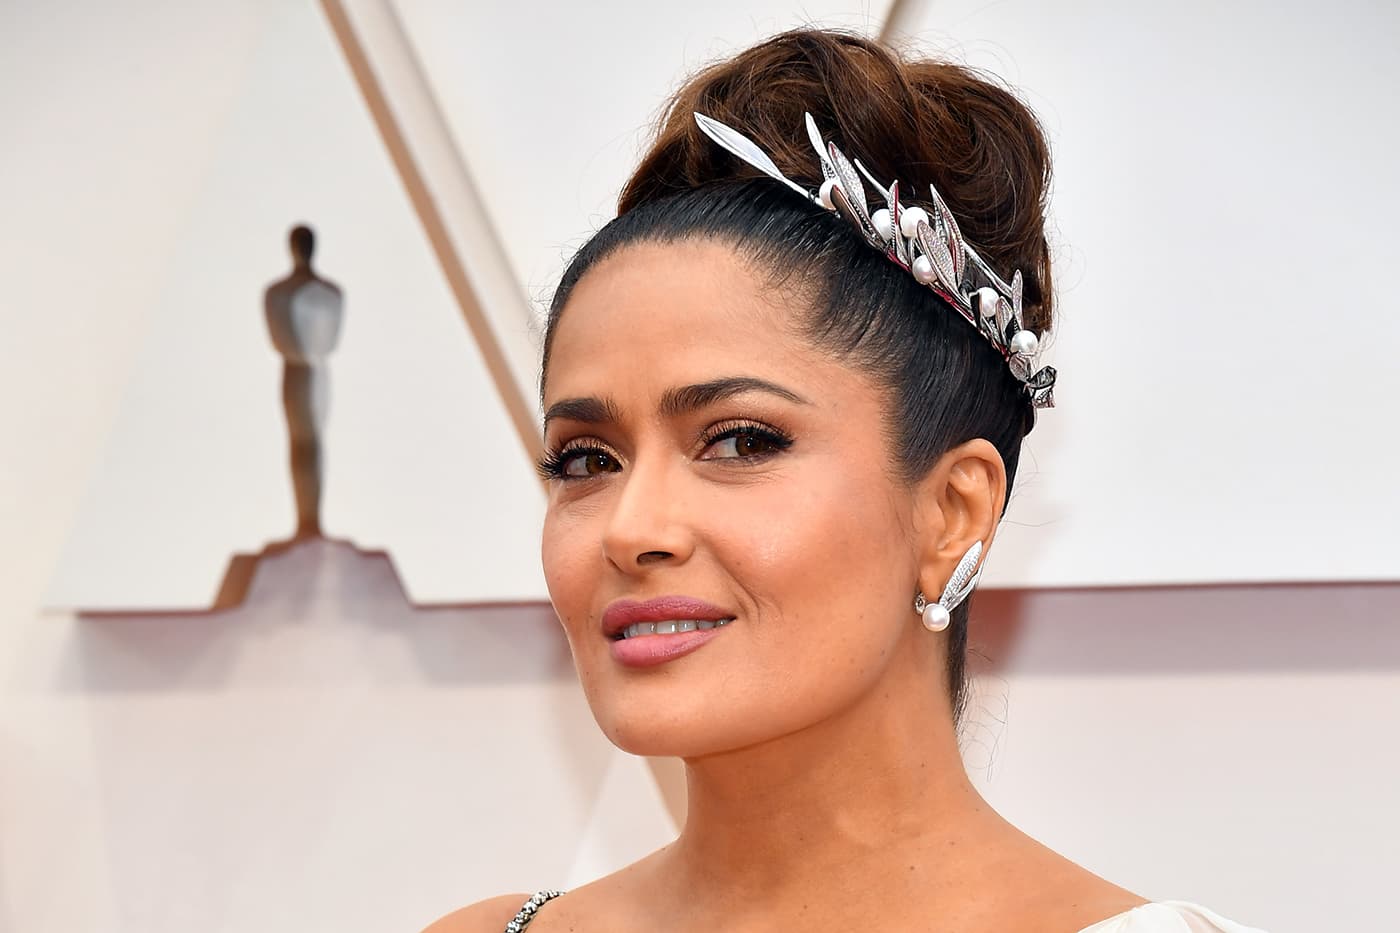 Salma Hayek wearing Boucheron Feuilles de Laurier necklace as headpiece and earrings, both with diamonds and pearls in white gold